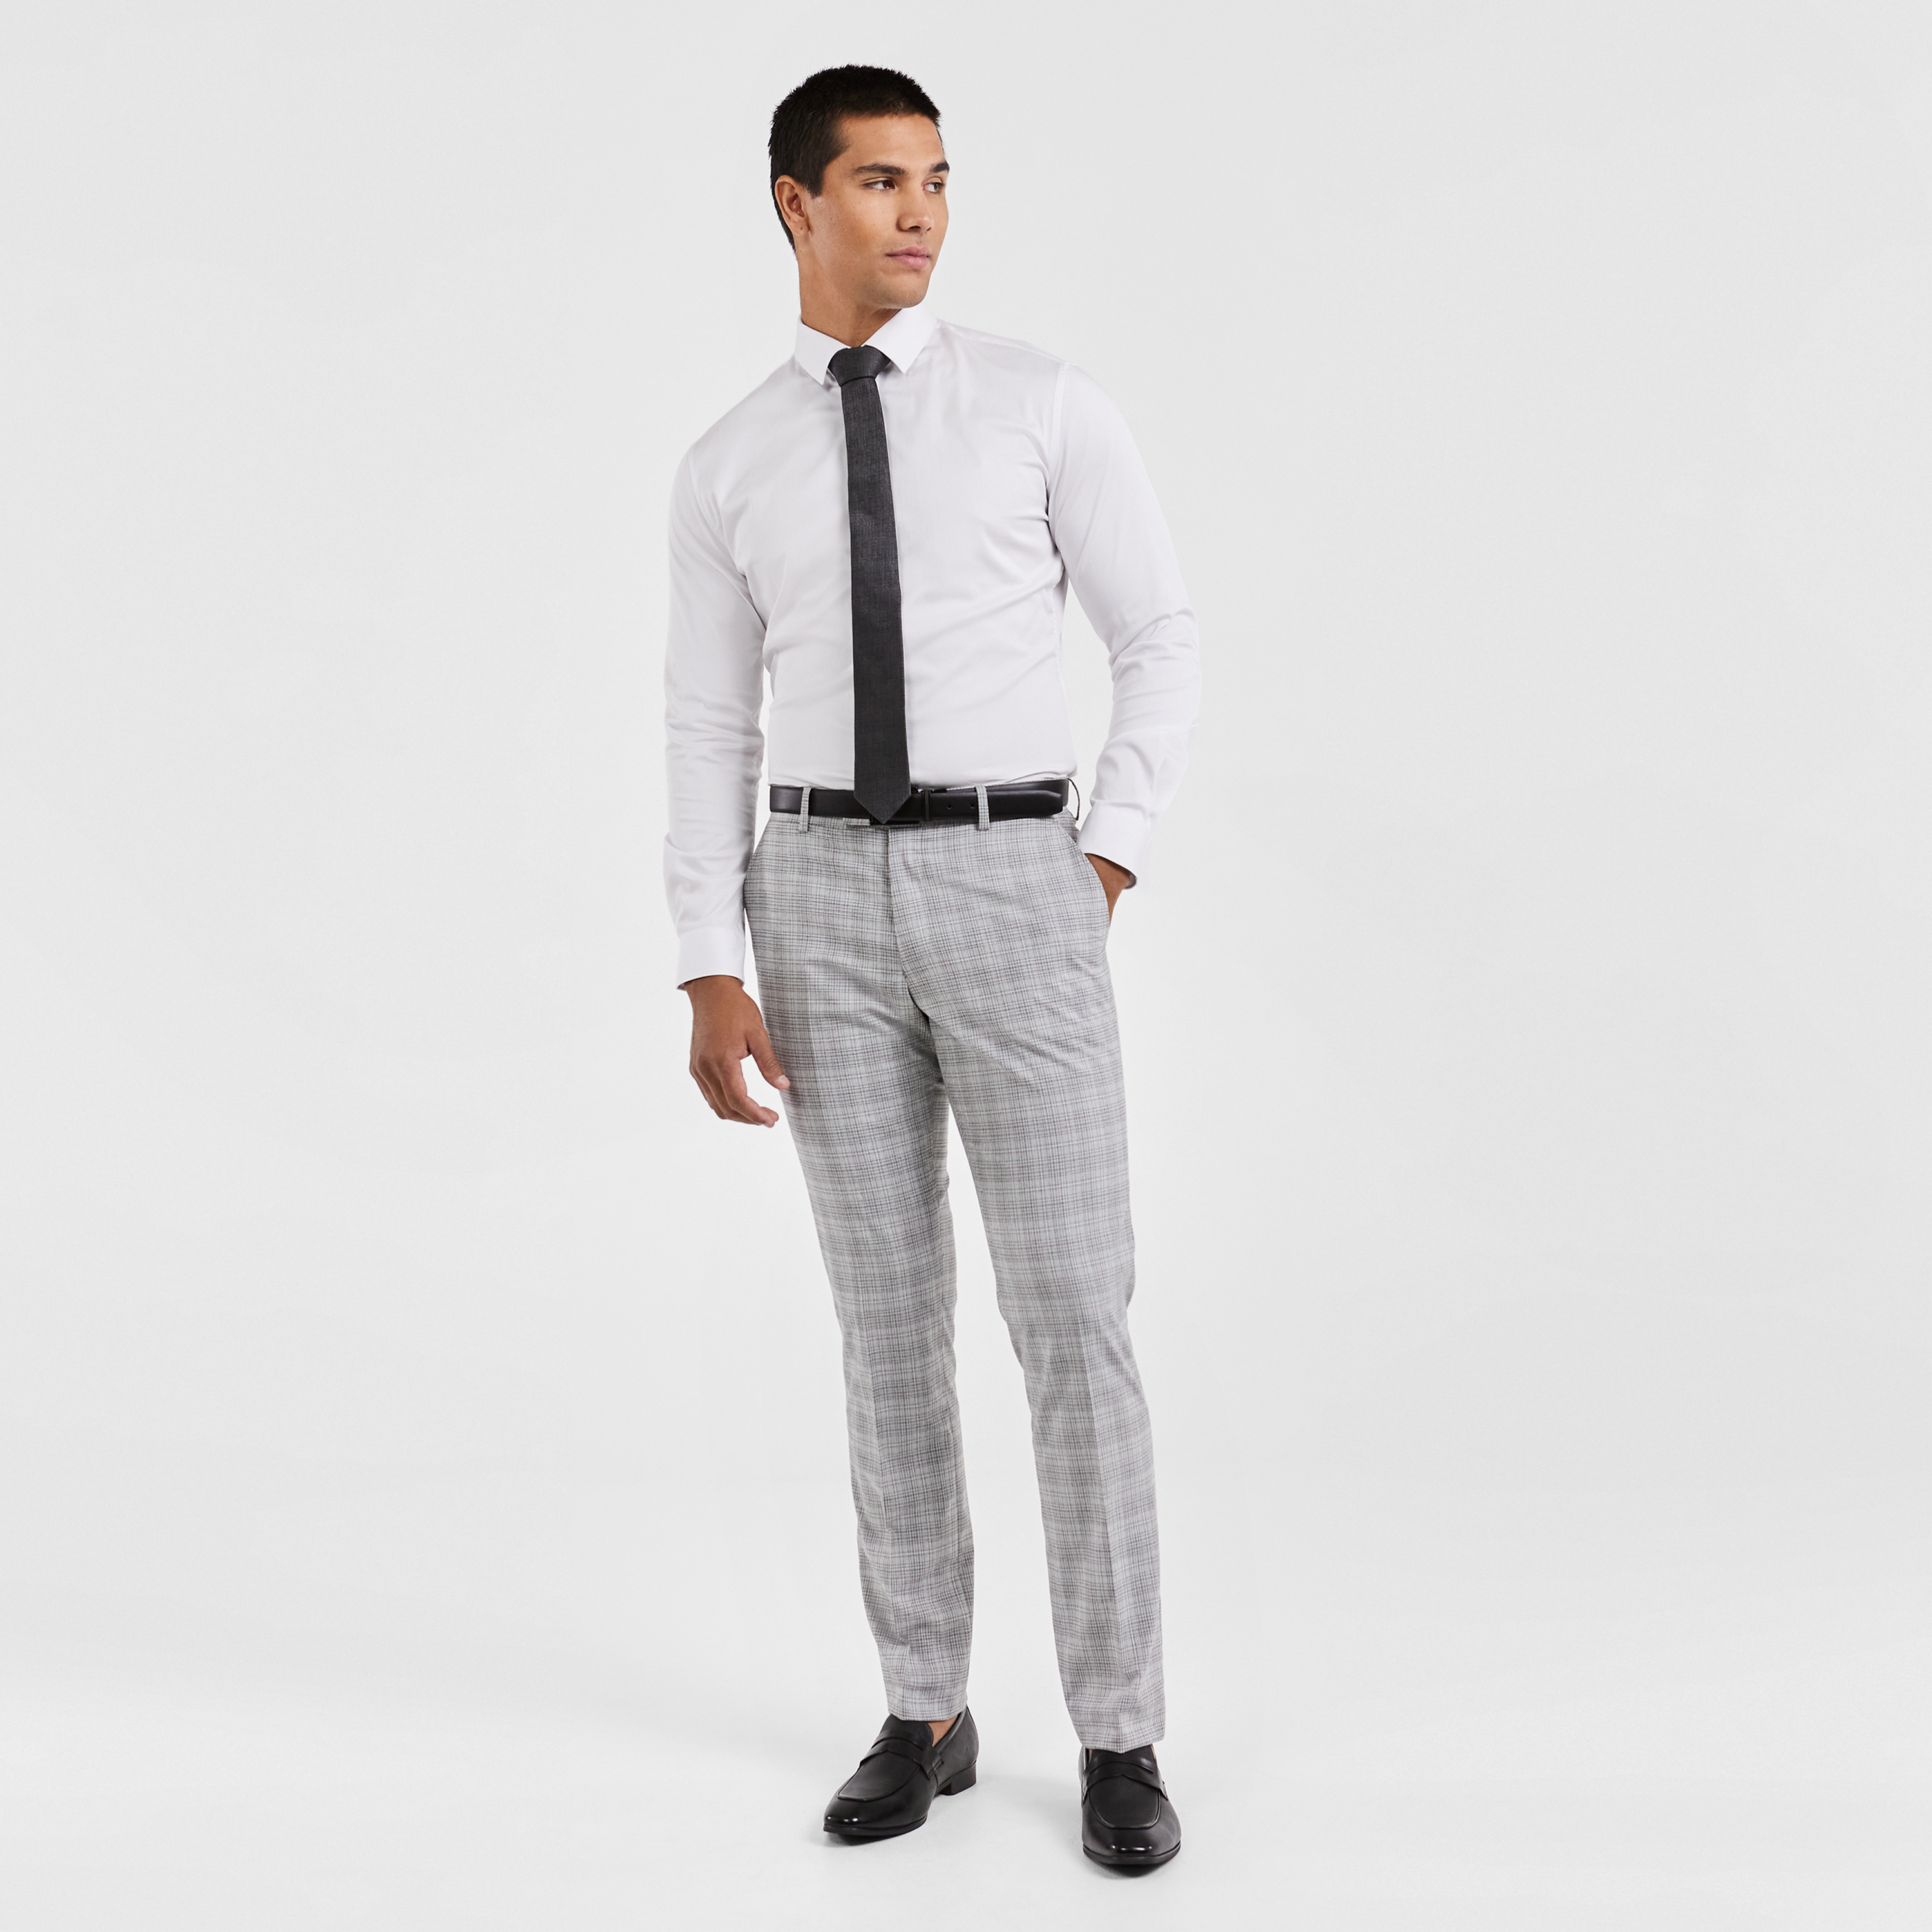 WOMEN'S, MEN'S AND KIDS' CLOTHING & ACCESSORIES | UNIQLO MY